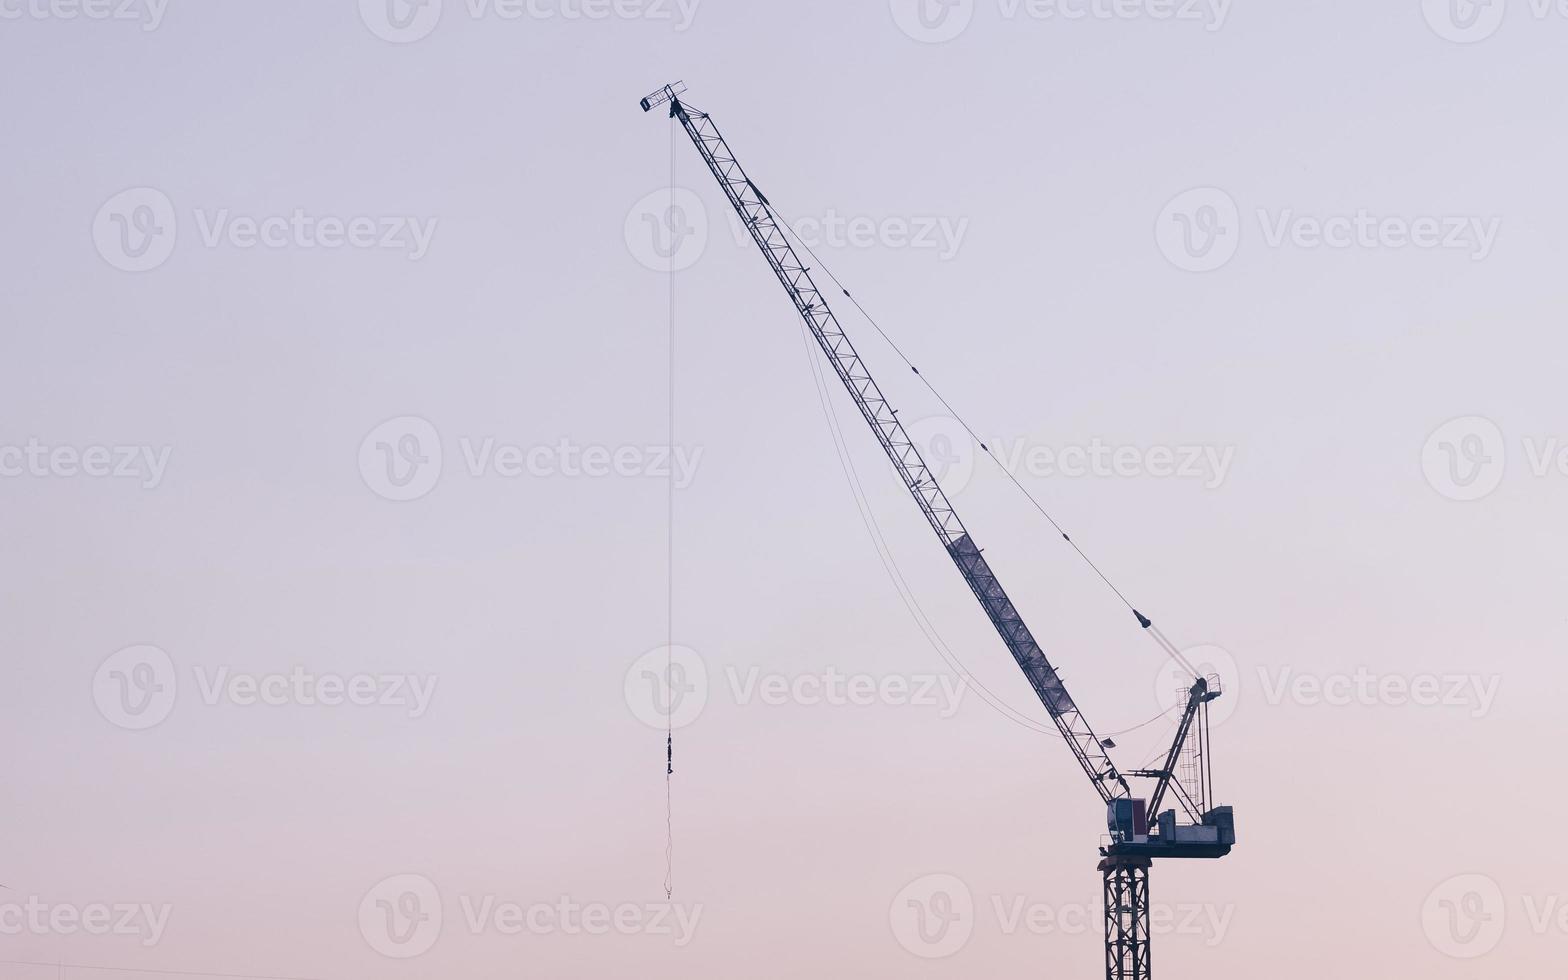 Abstract Industrial background with construction cranes silhouettes over amazing sunset sky photo